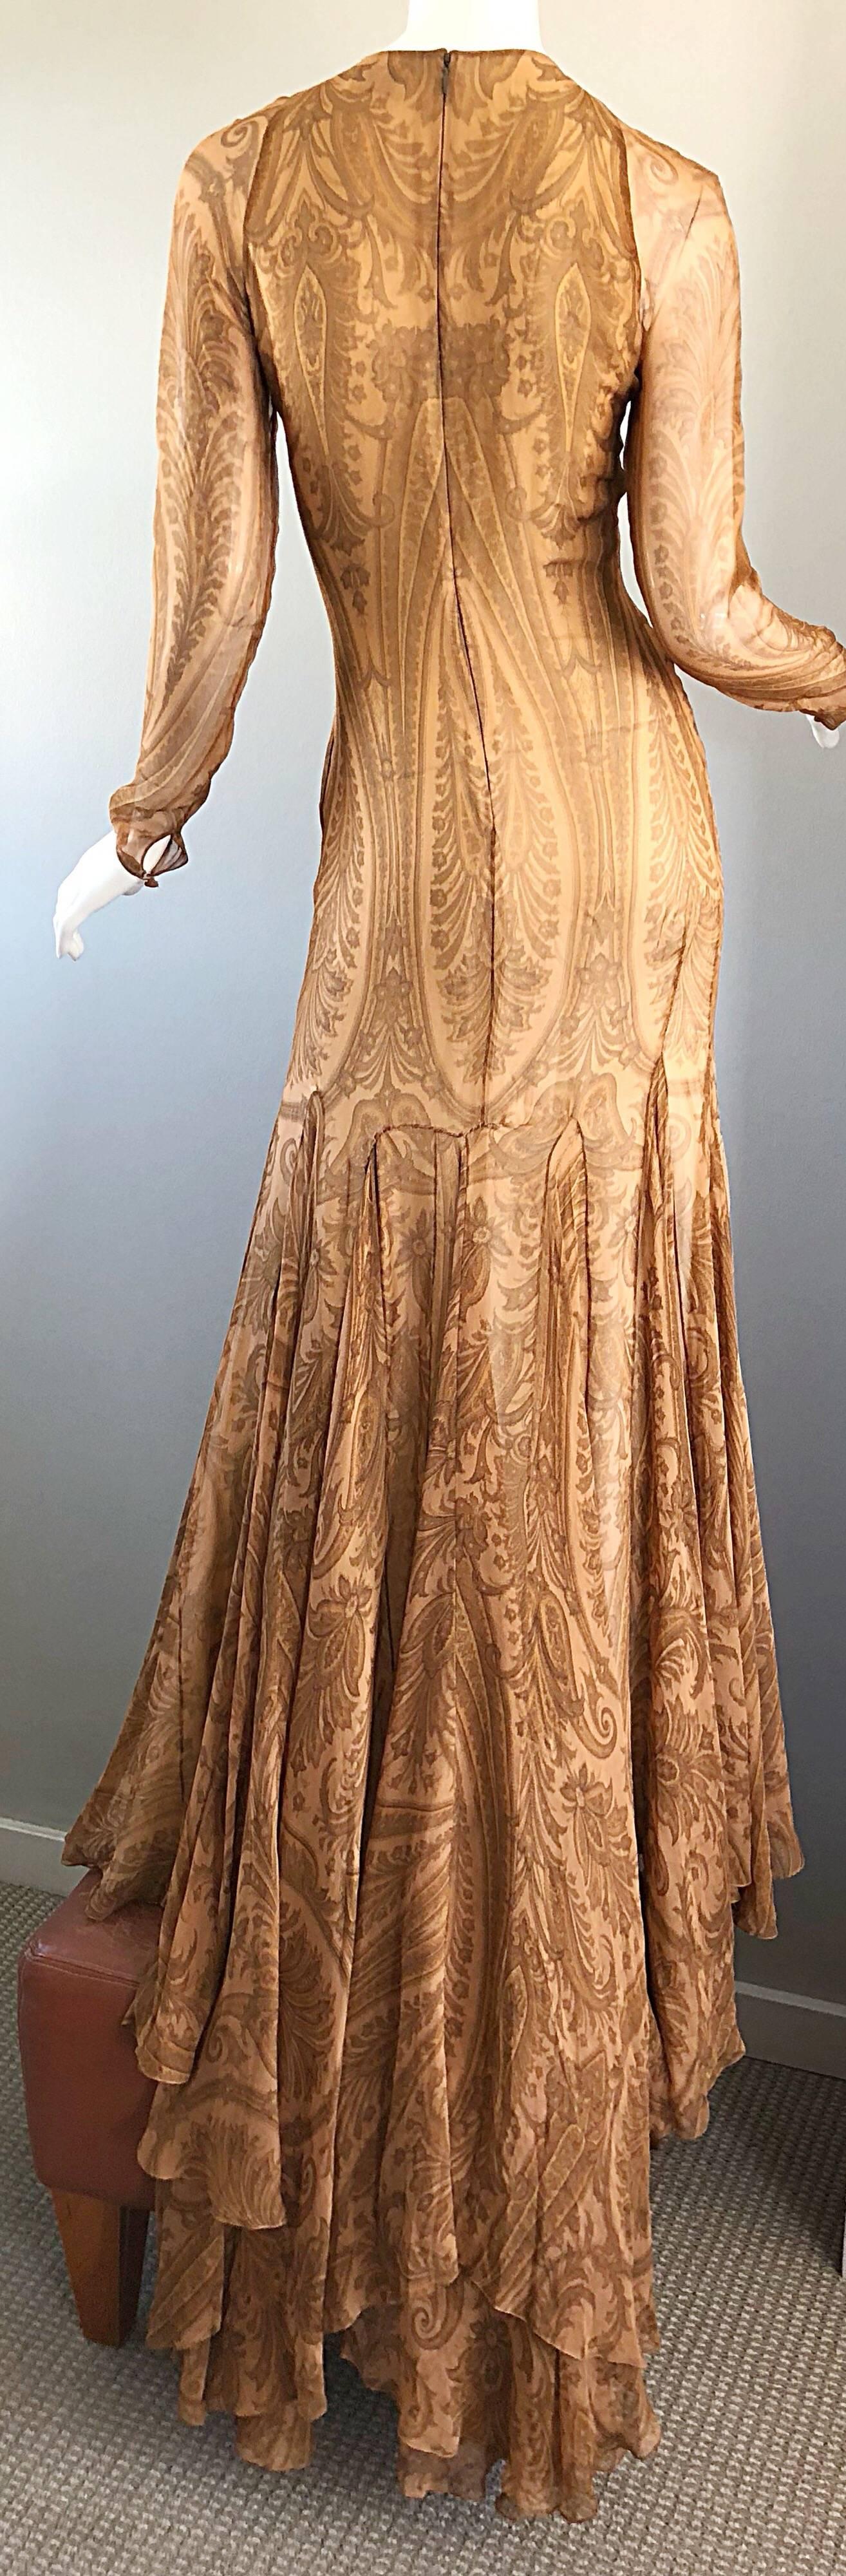 Sensational 1990s Bill Blass Couture Nude Silk Chiffon Paisley Vintage 90s Gown  For Sale 8